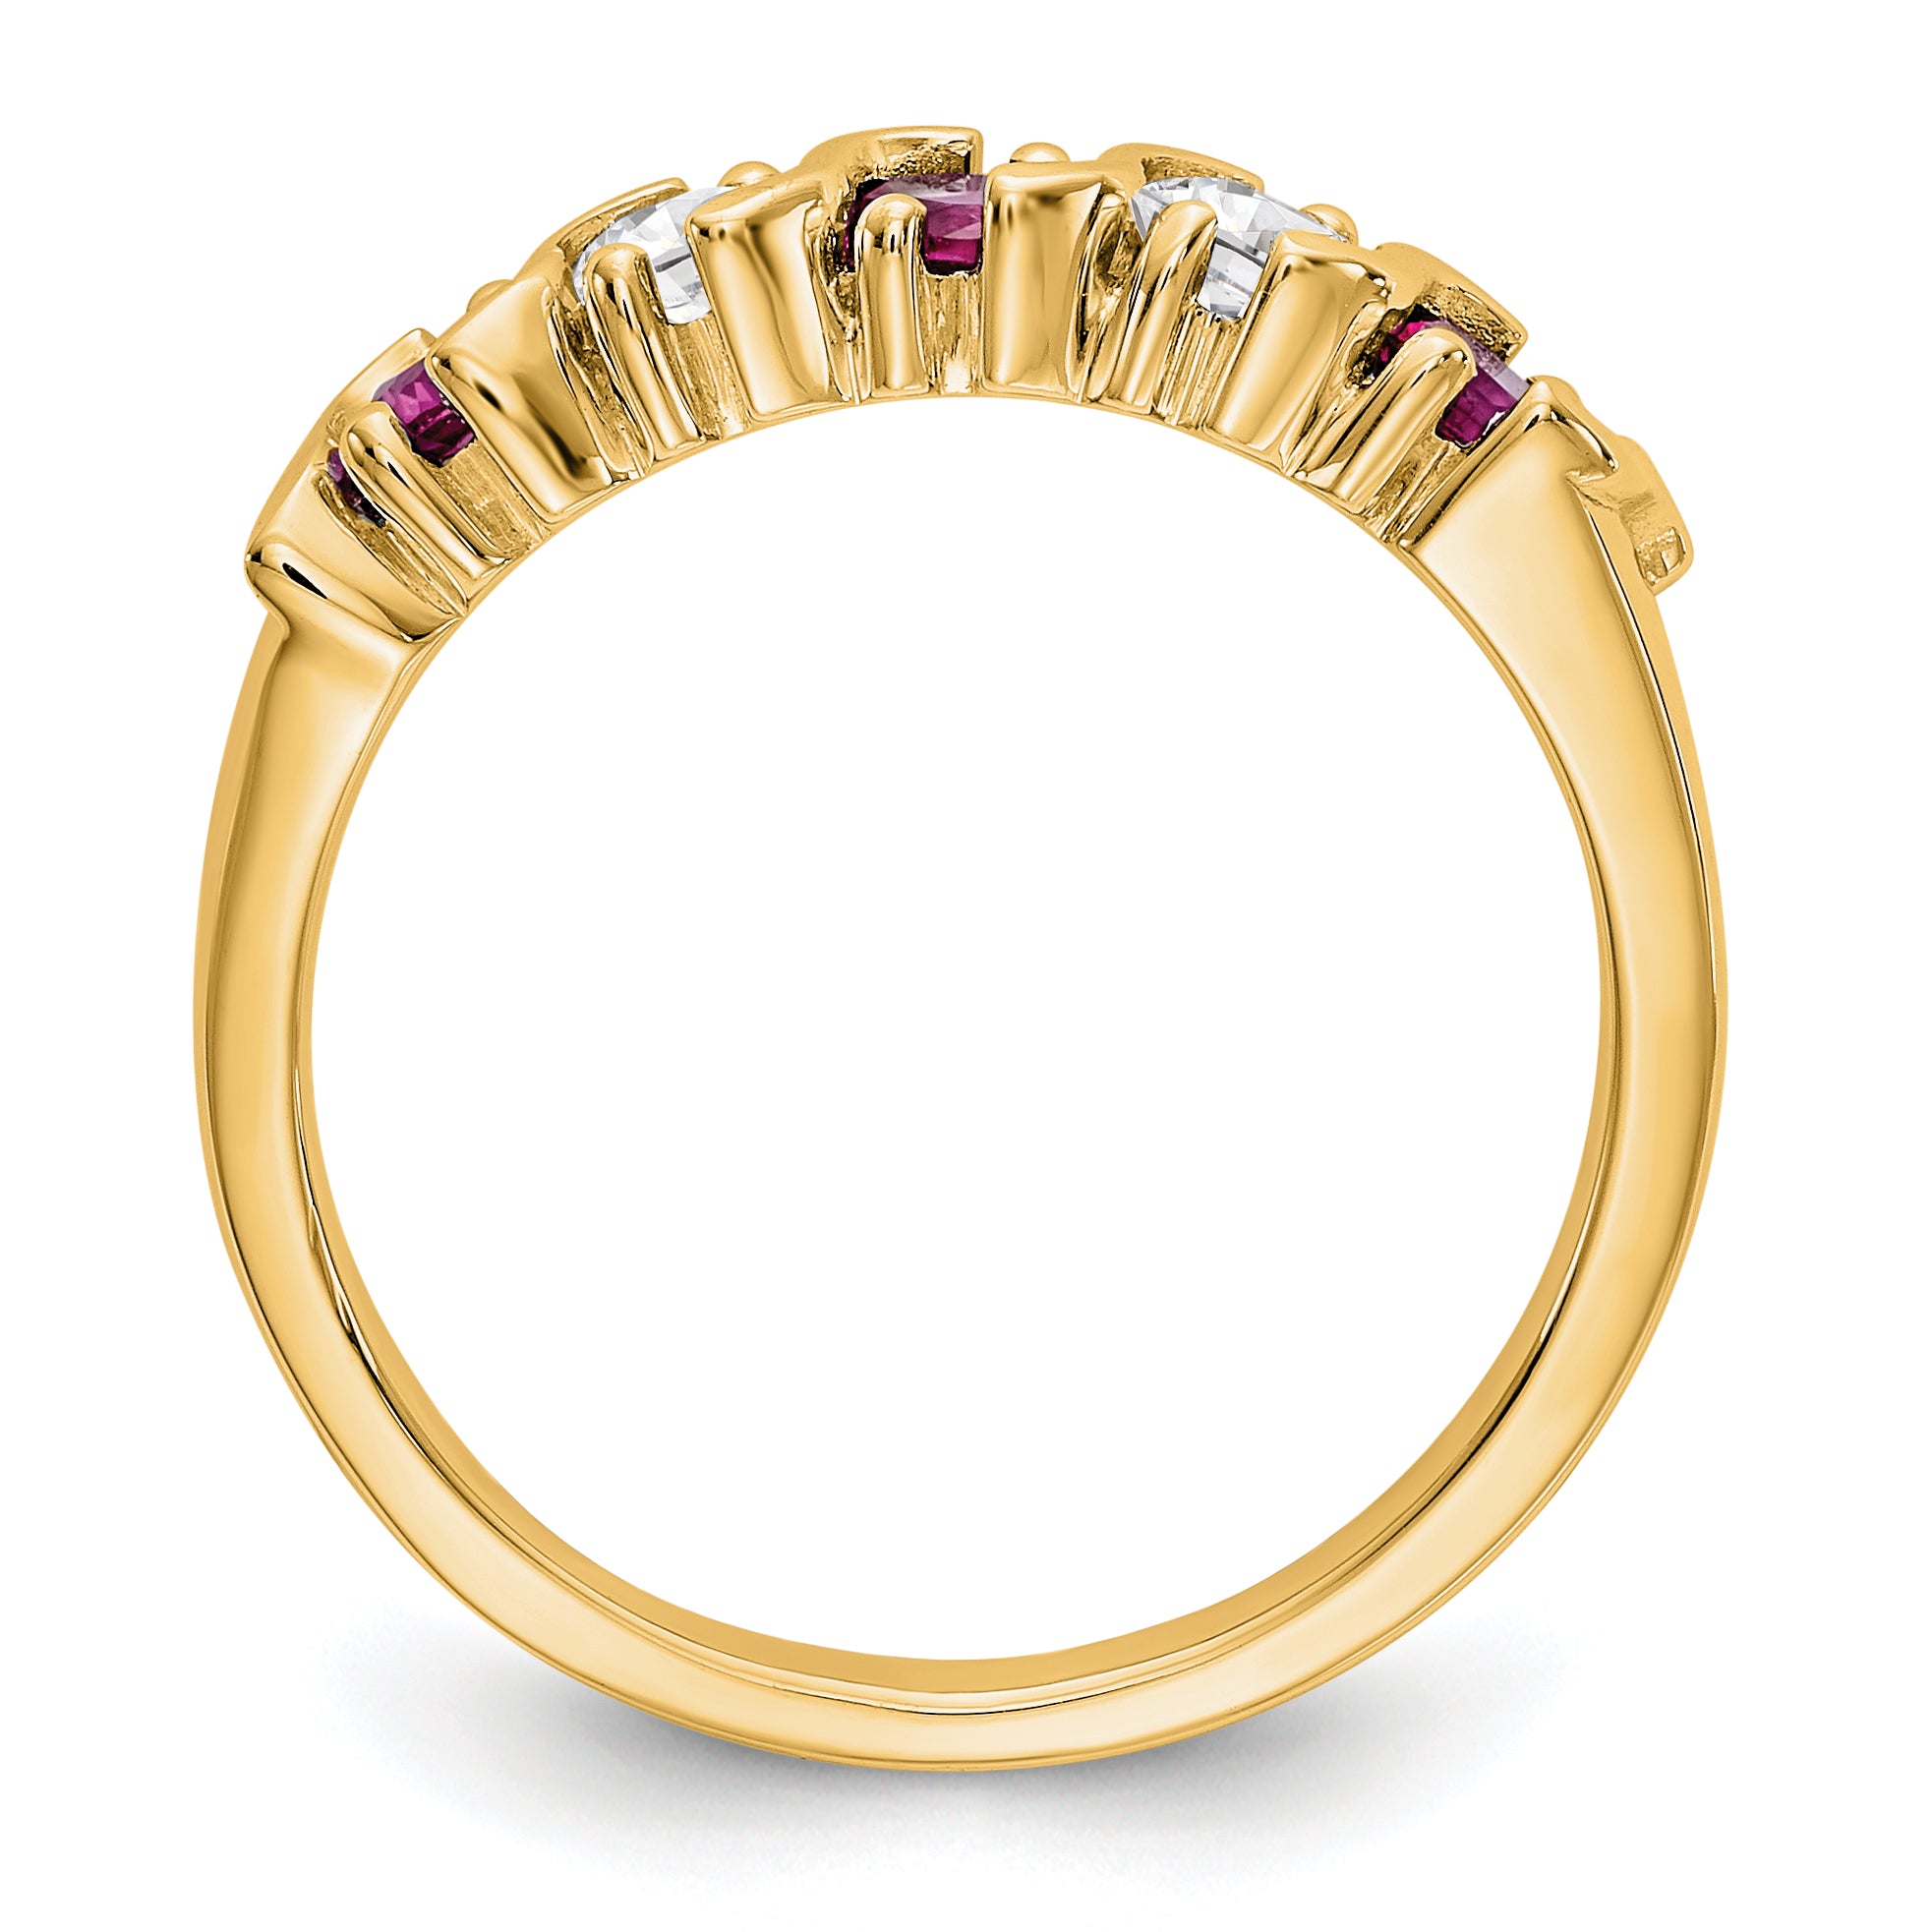 14K Yellow Gold 1/3 carat Diamond and Ruby Complete Band